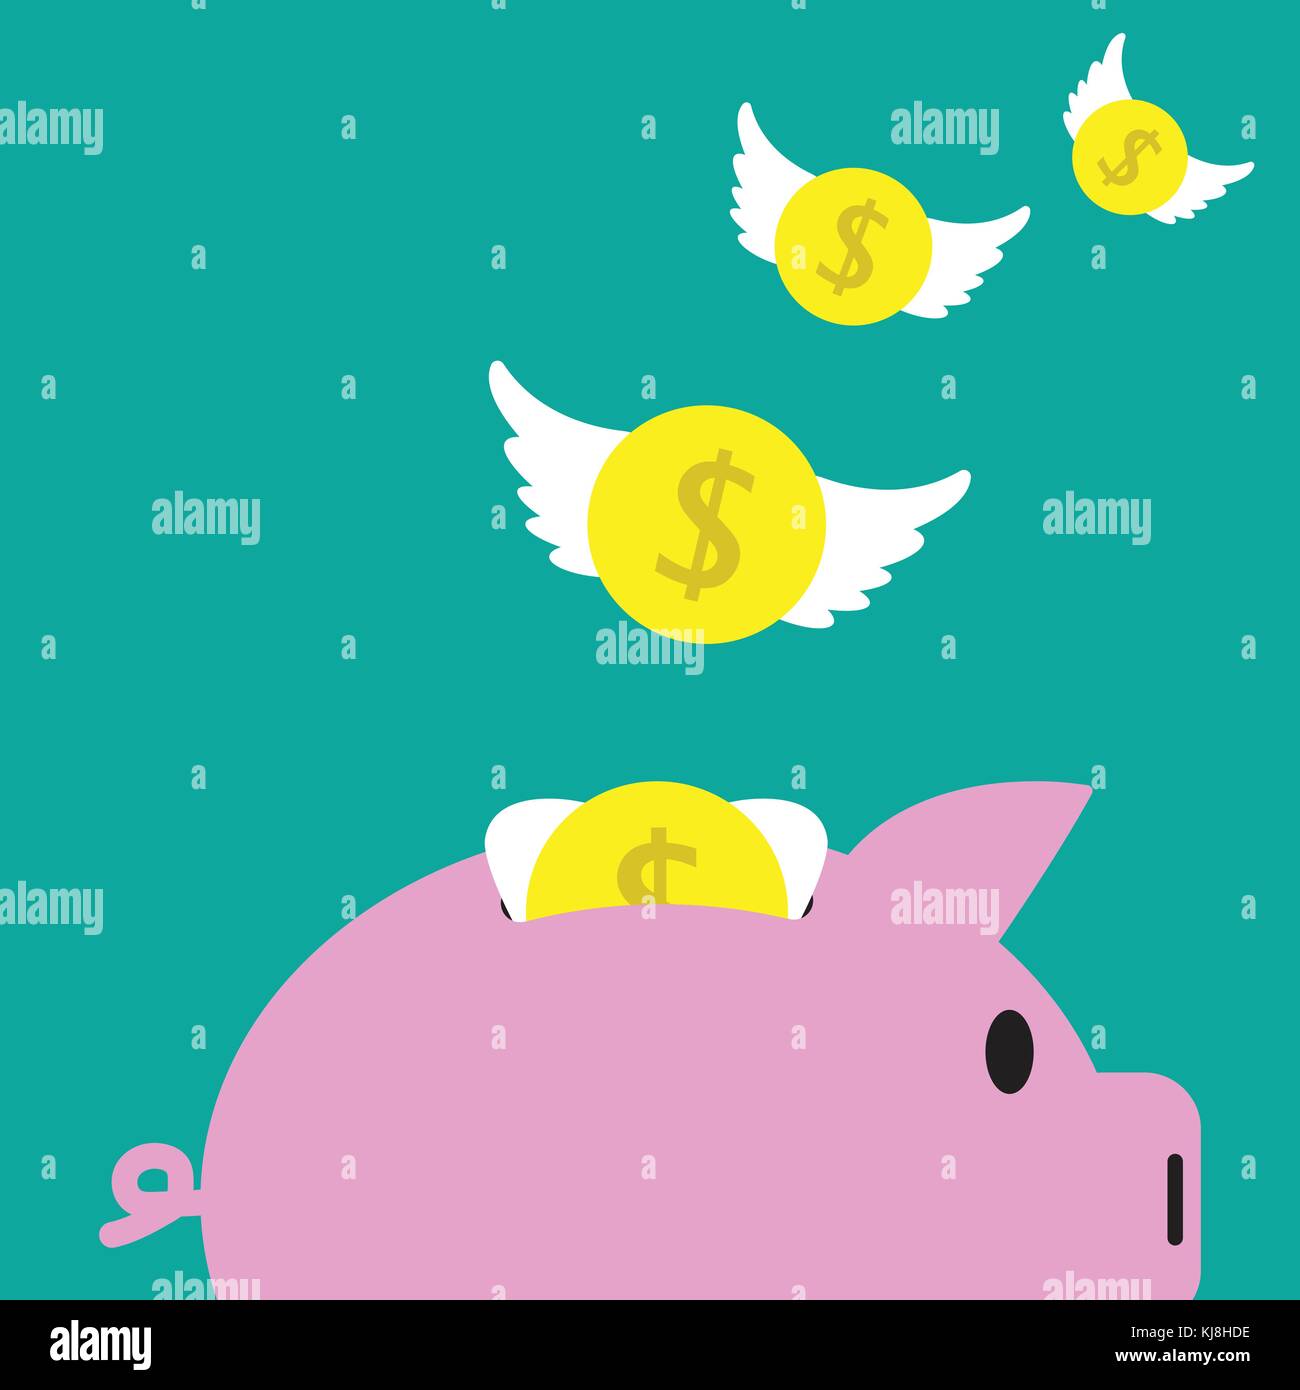 Vector Illustration Business Concept Designed As Coins With White Wings Are Flying Away From A Pink Piggy Bank. It Means Income, Revenue Runs Out. Stock Vector